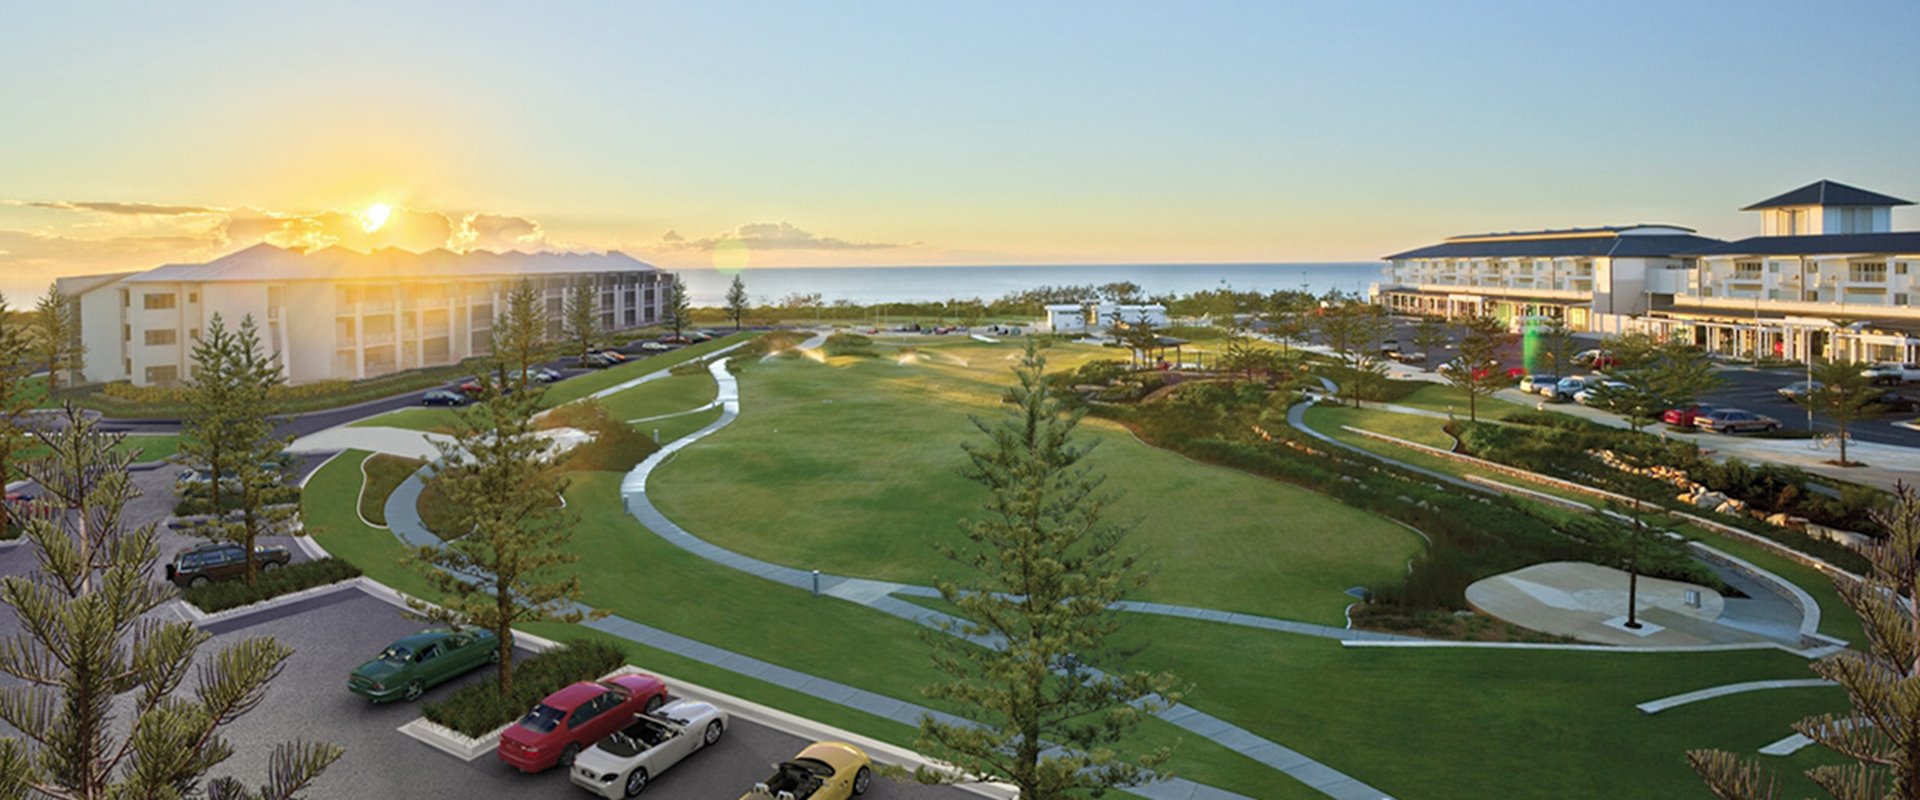 Salt Village Kingscliff | Conference Venues Regional NSW | Conference Venues New South Wales